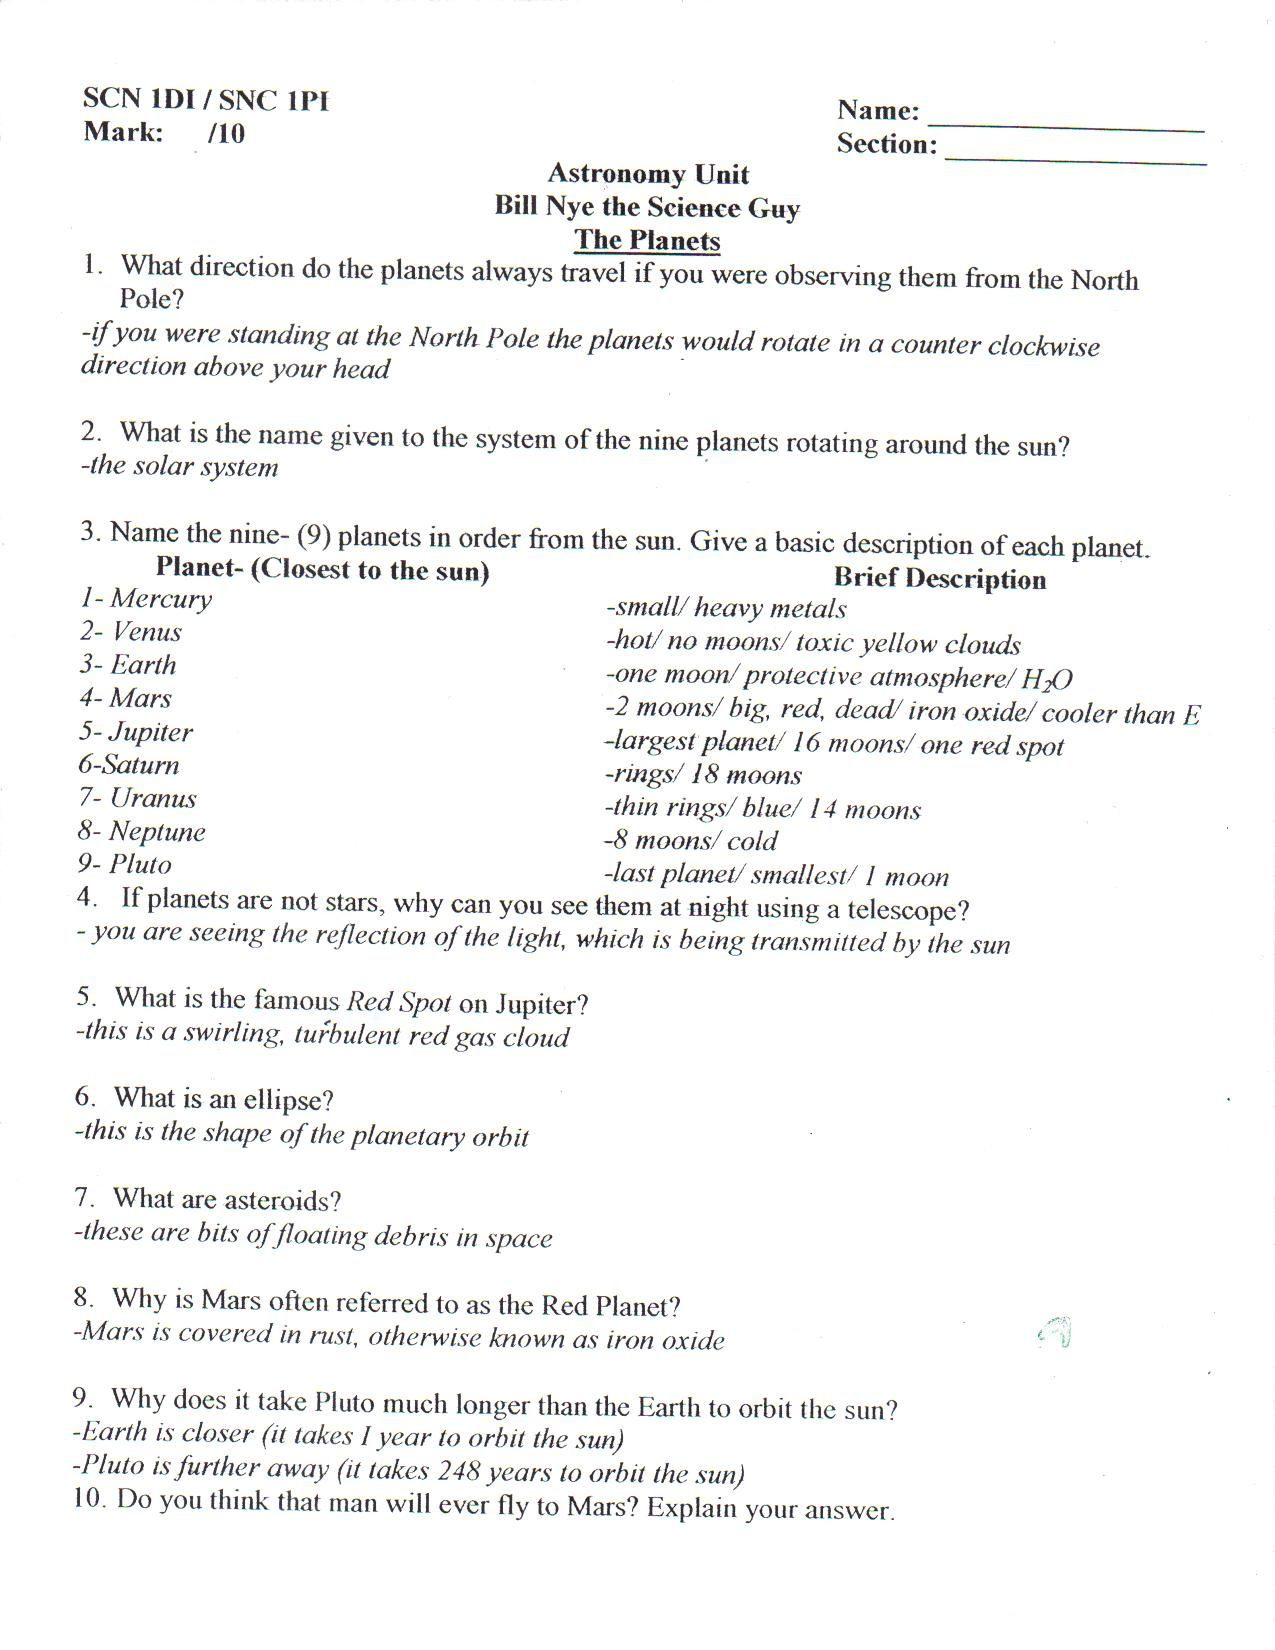 Skills Worksheet Directed Reading A Answer Key